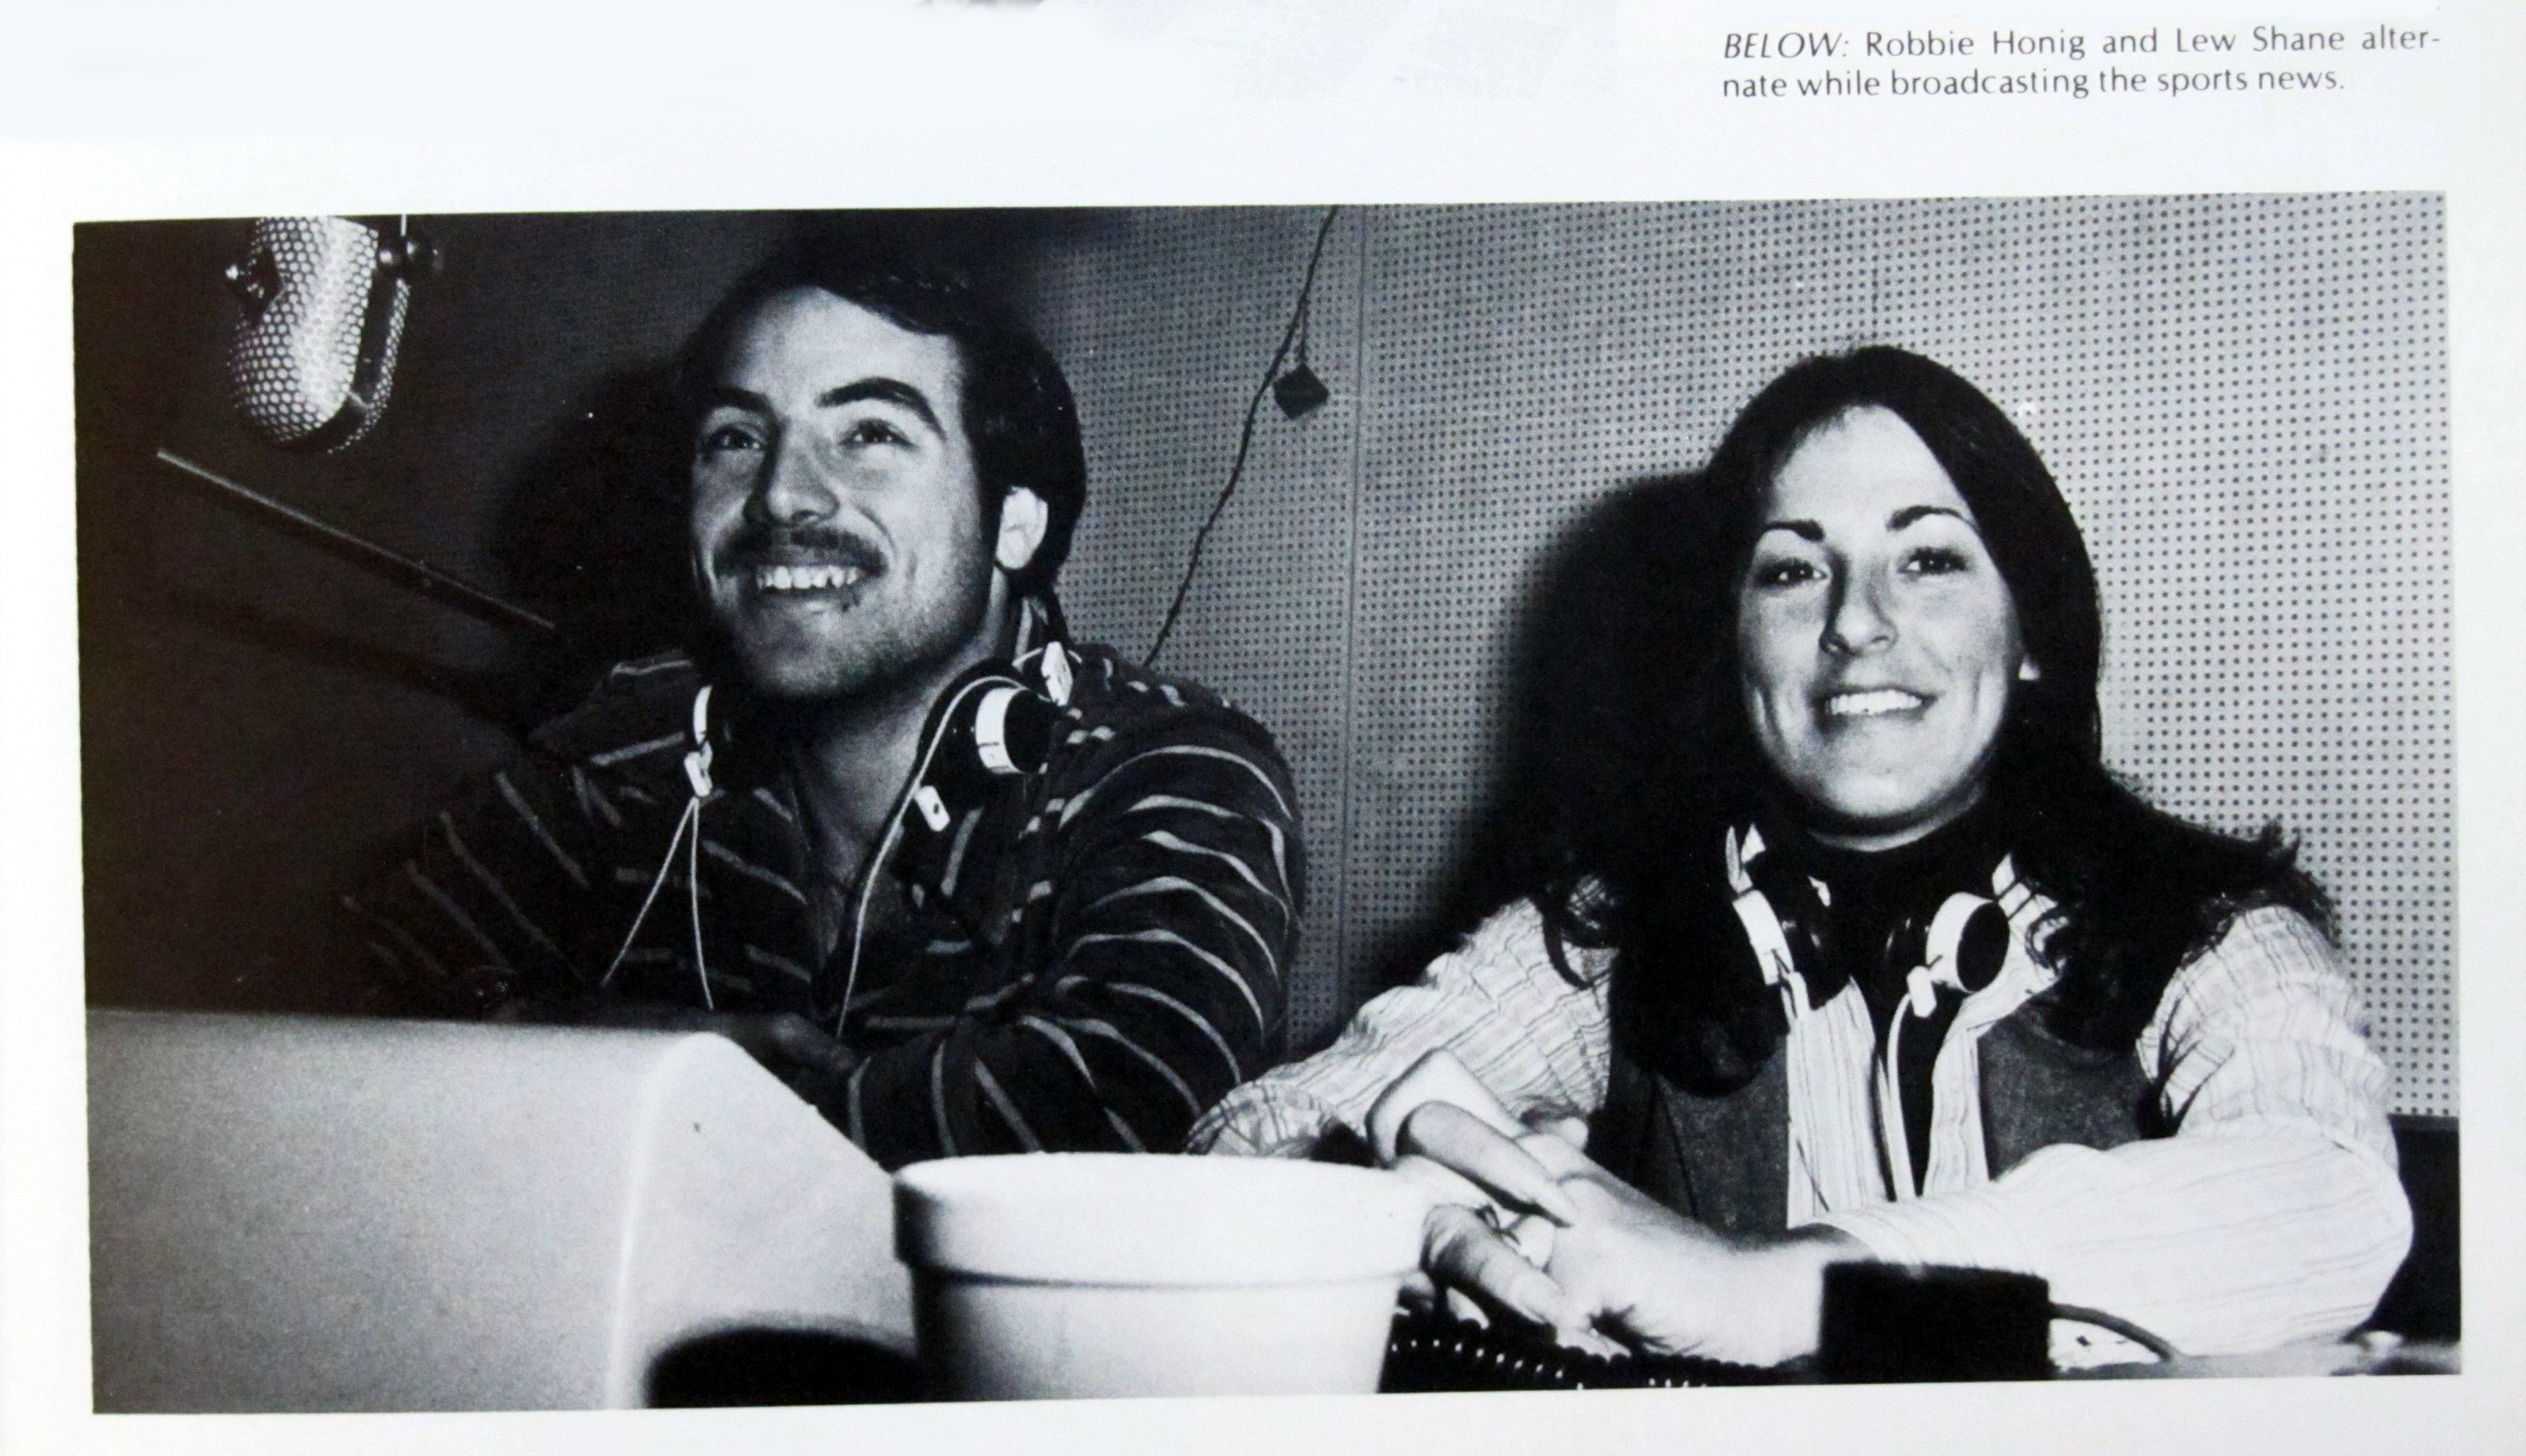 1979 - Lew Shane and Robbie Honig in Studio A doing the News